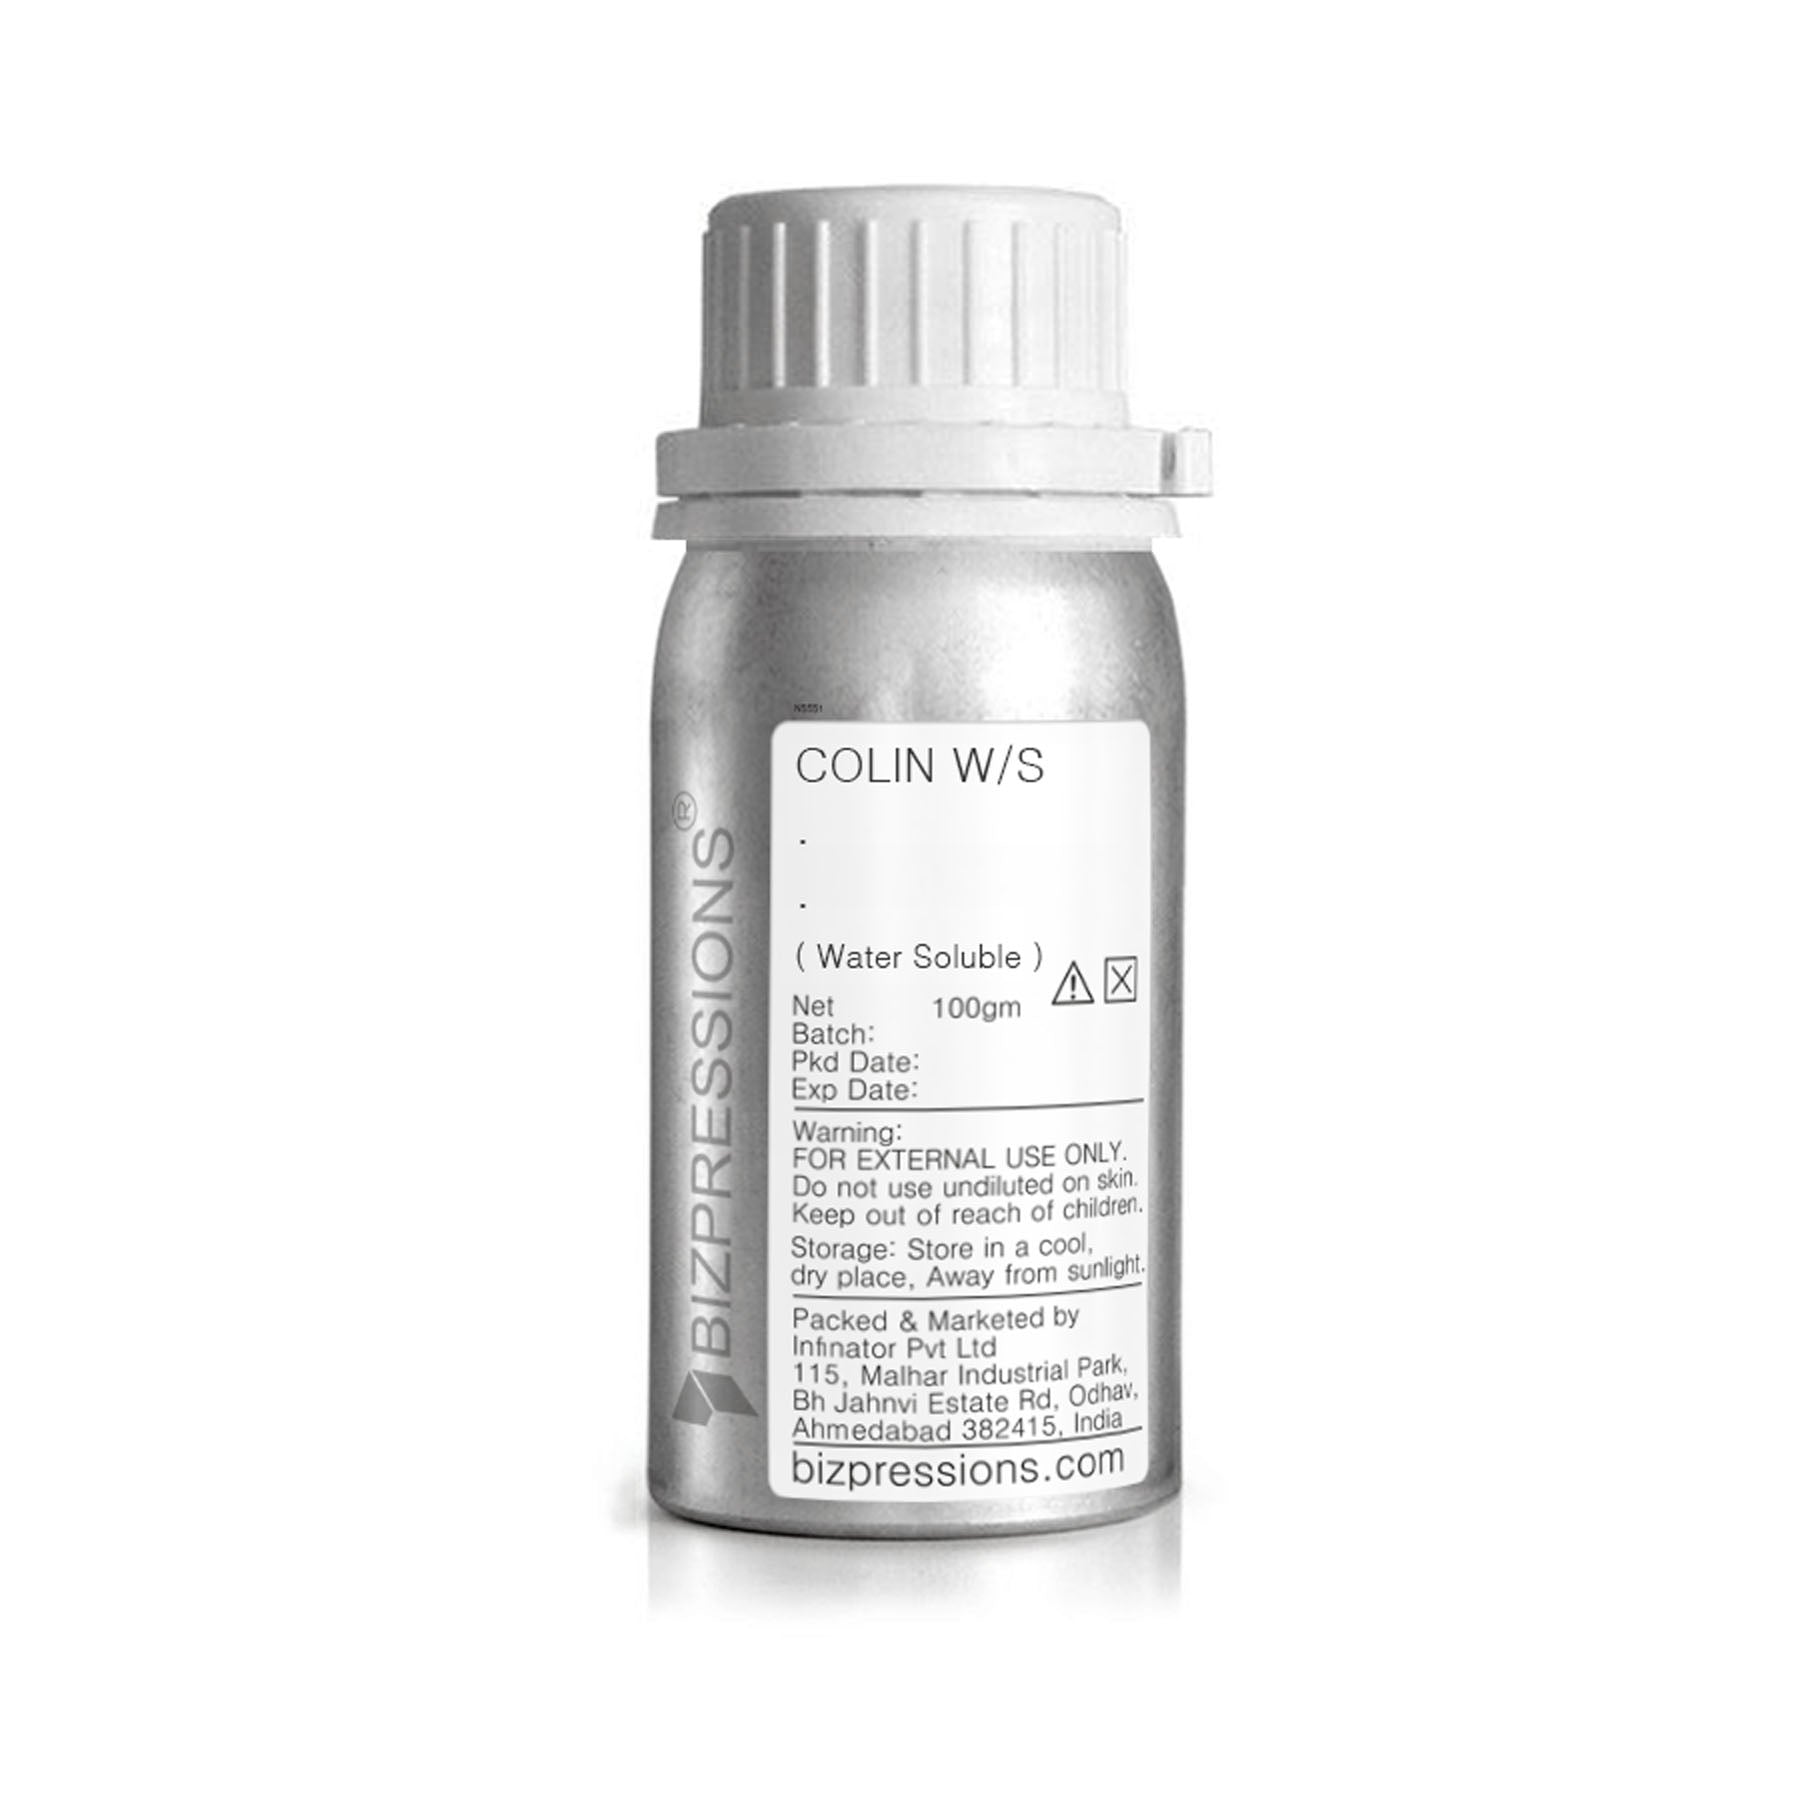 COLIN W/S - Fragrance ( Water Soluble ) - 100 gm